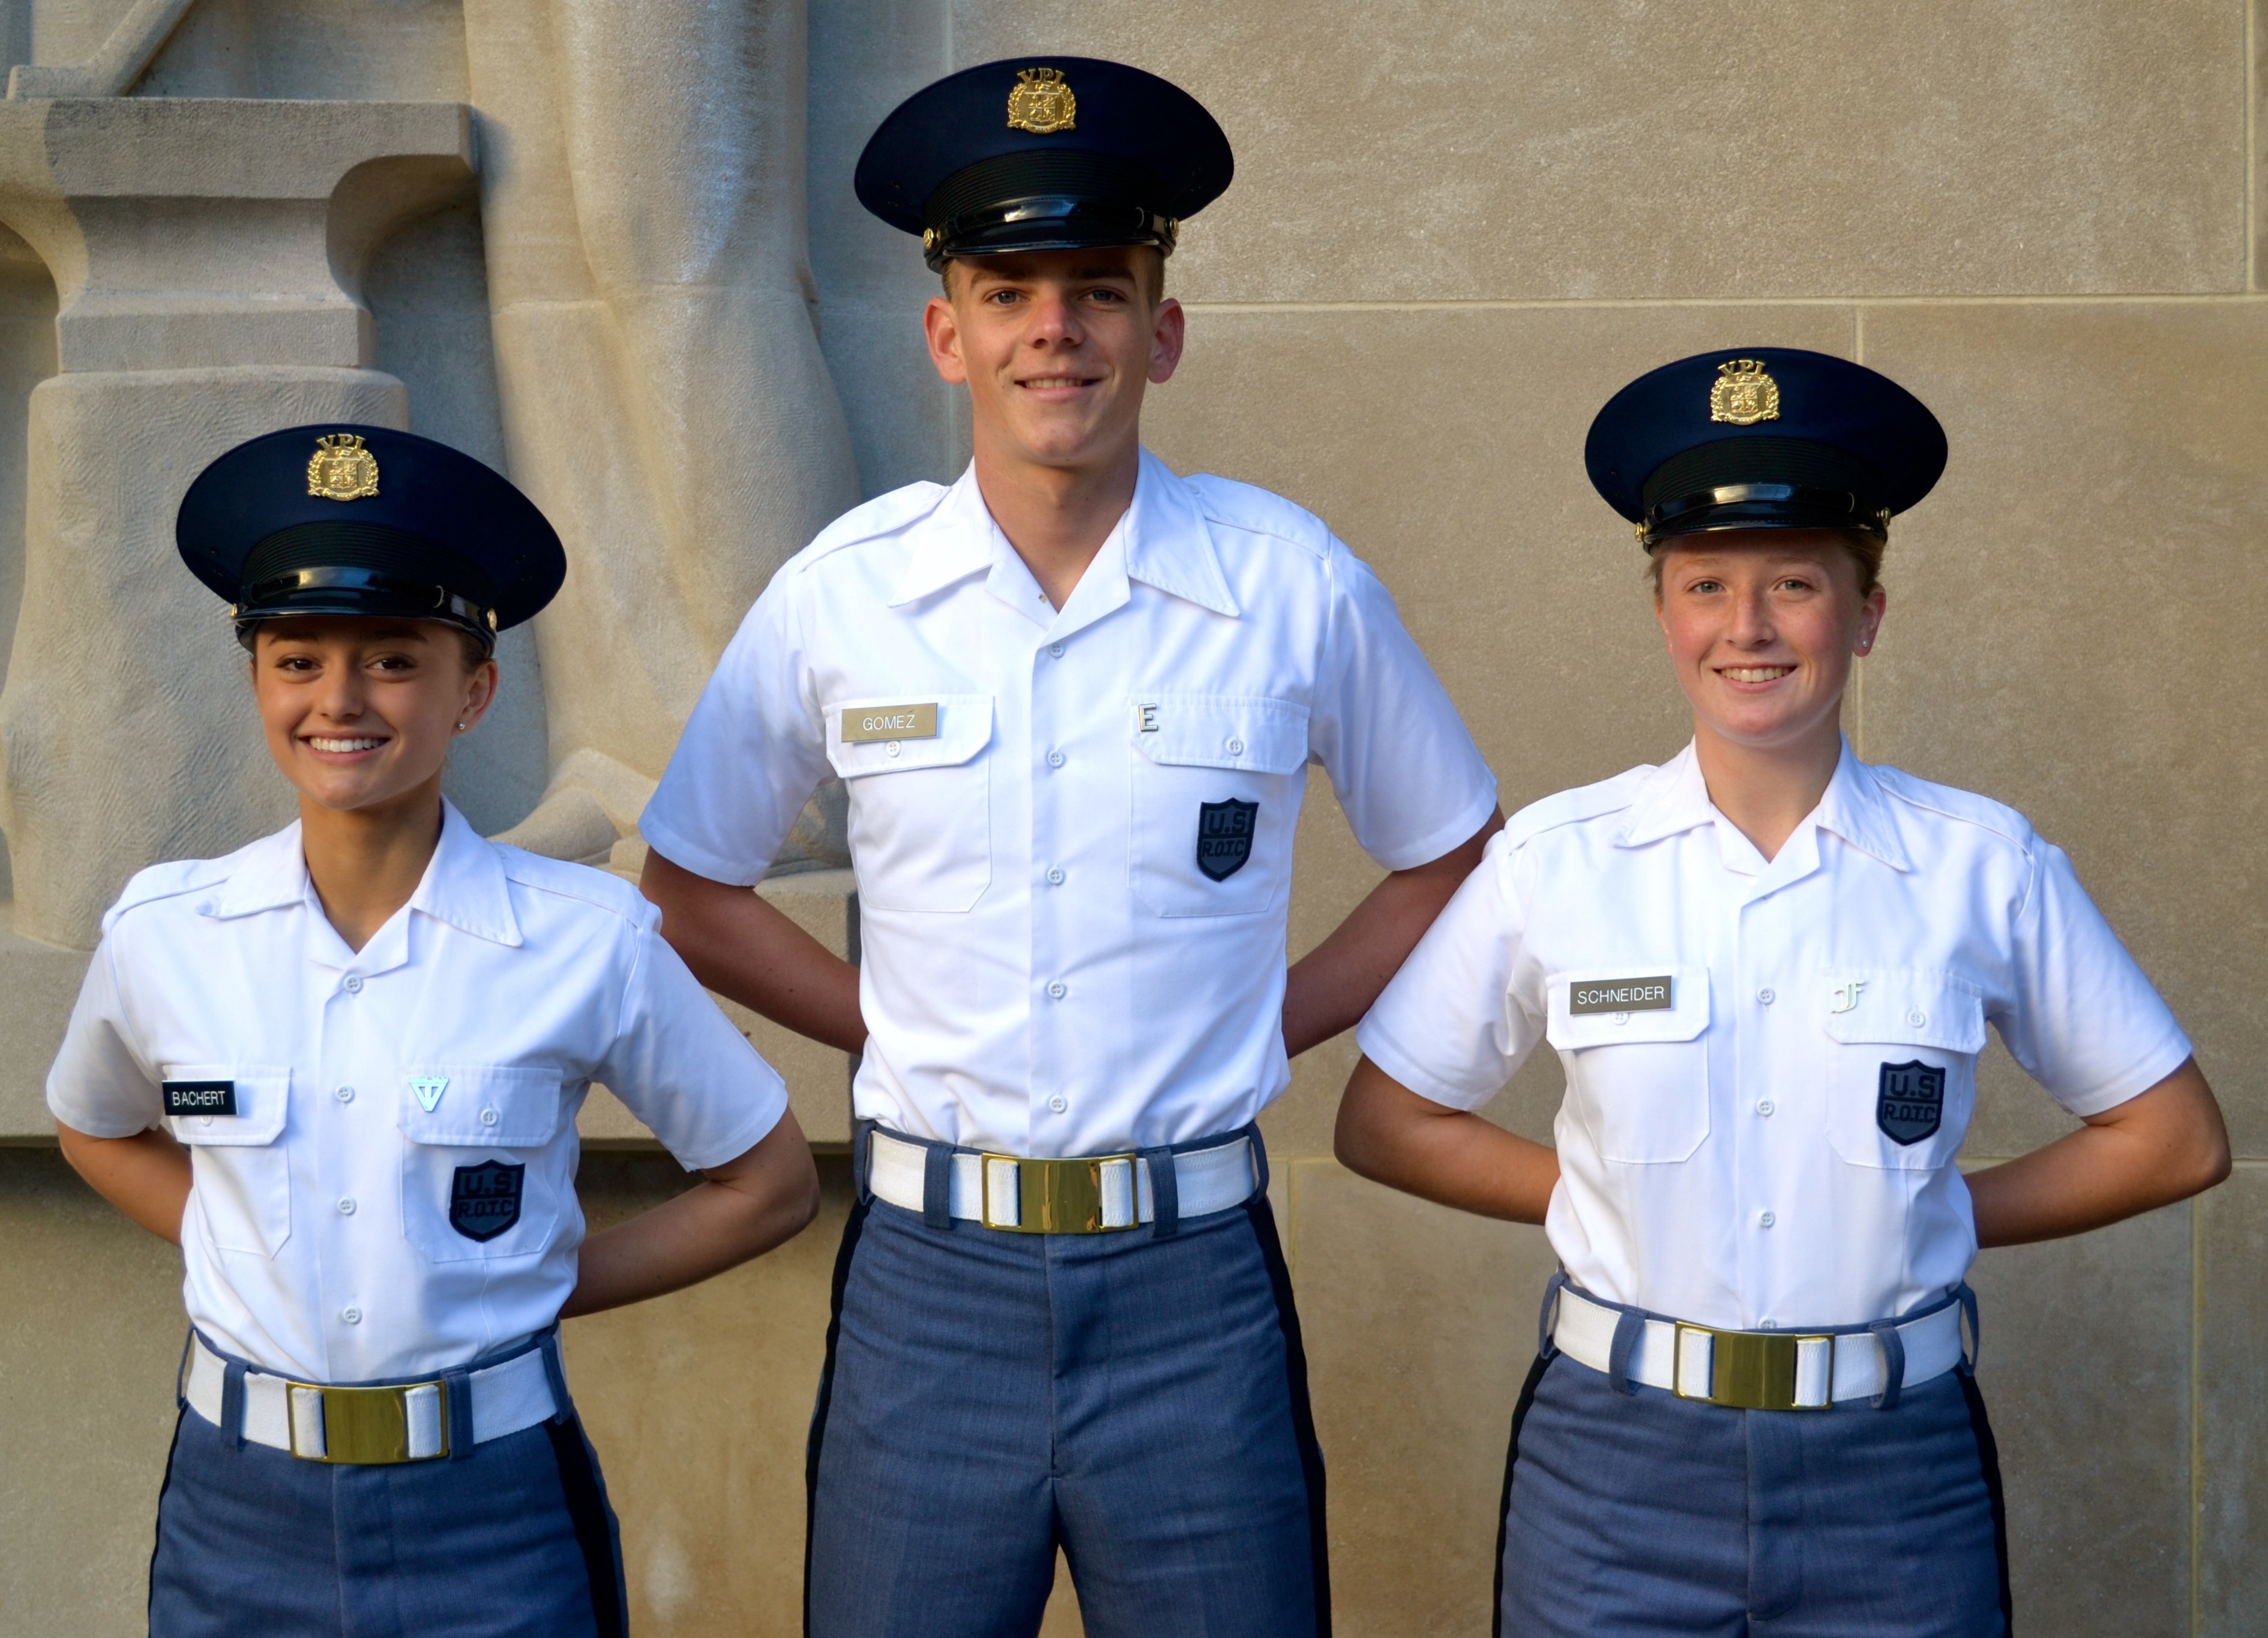 From left to right are Cadets Sabrina Bachert, Alex Gomez, and Robyn Schneider in front of the Pylons.